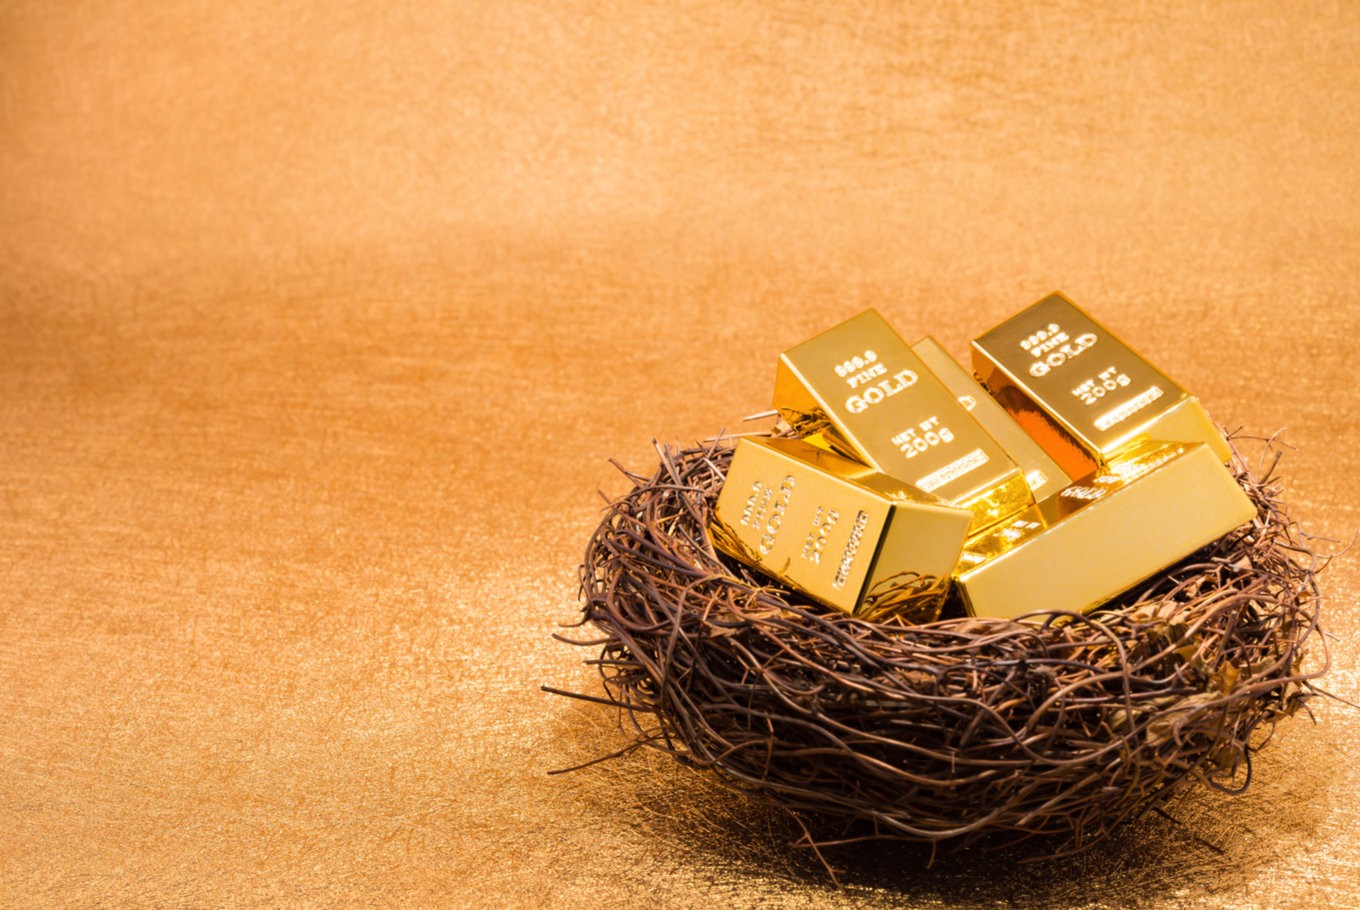 Are You Struggling With gold ira tax rules? Let's Chat